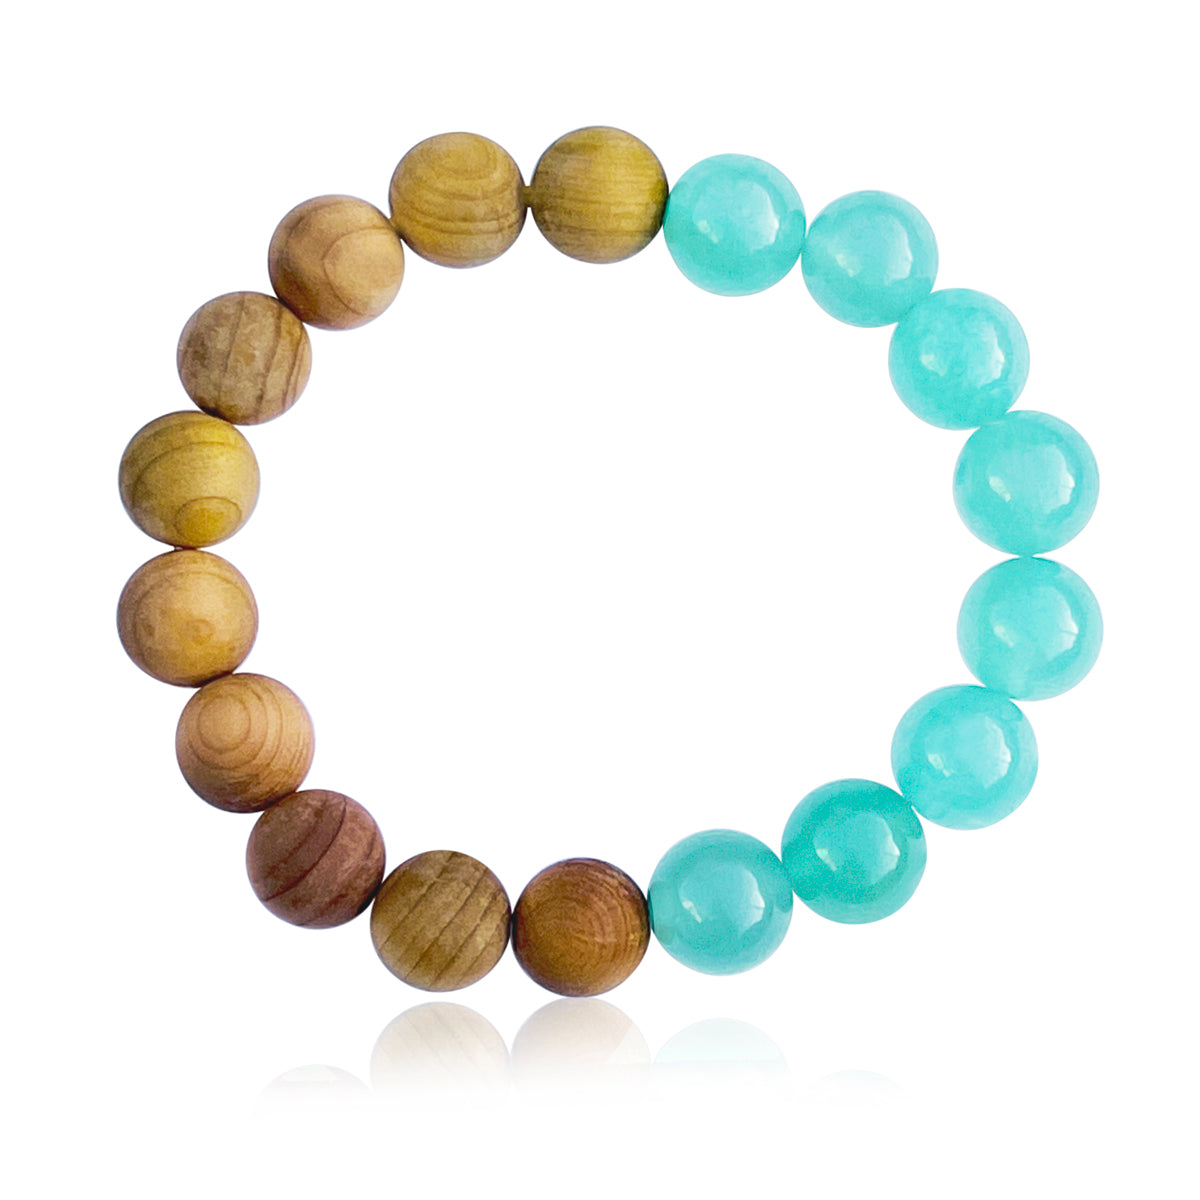 This stunning Coastal Horizon Bracelet features a mix of fragrant Sandalwood and turquoise blue / green Aventurine, reminiscent of the sand and ocean.    This Coastal Horizon Earrings helps you stay in that Endless Summer mindset all year around. 